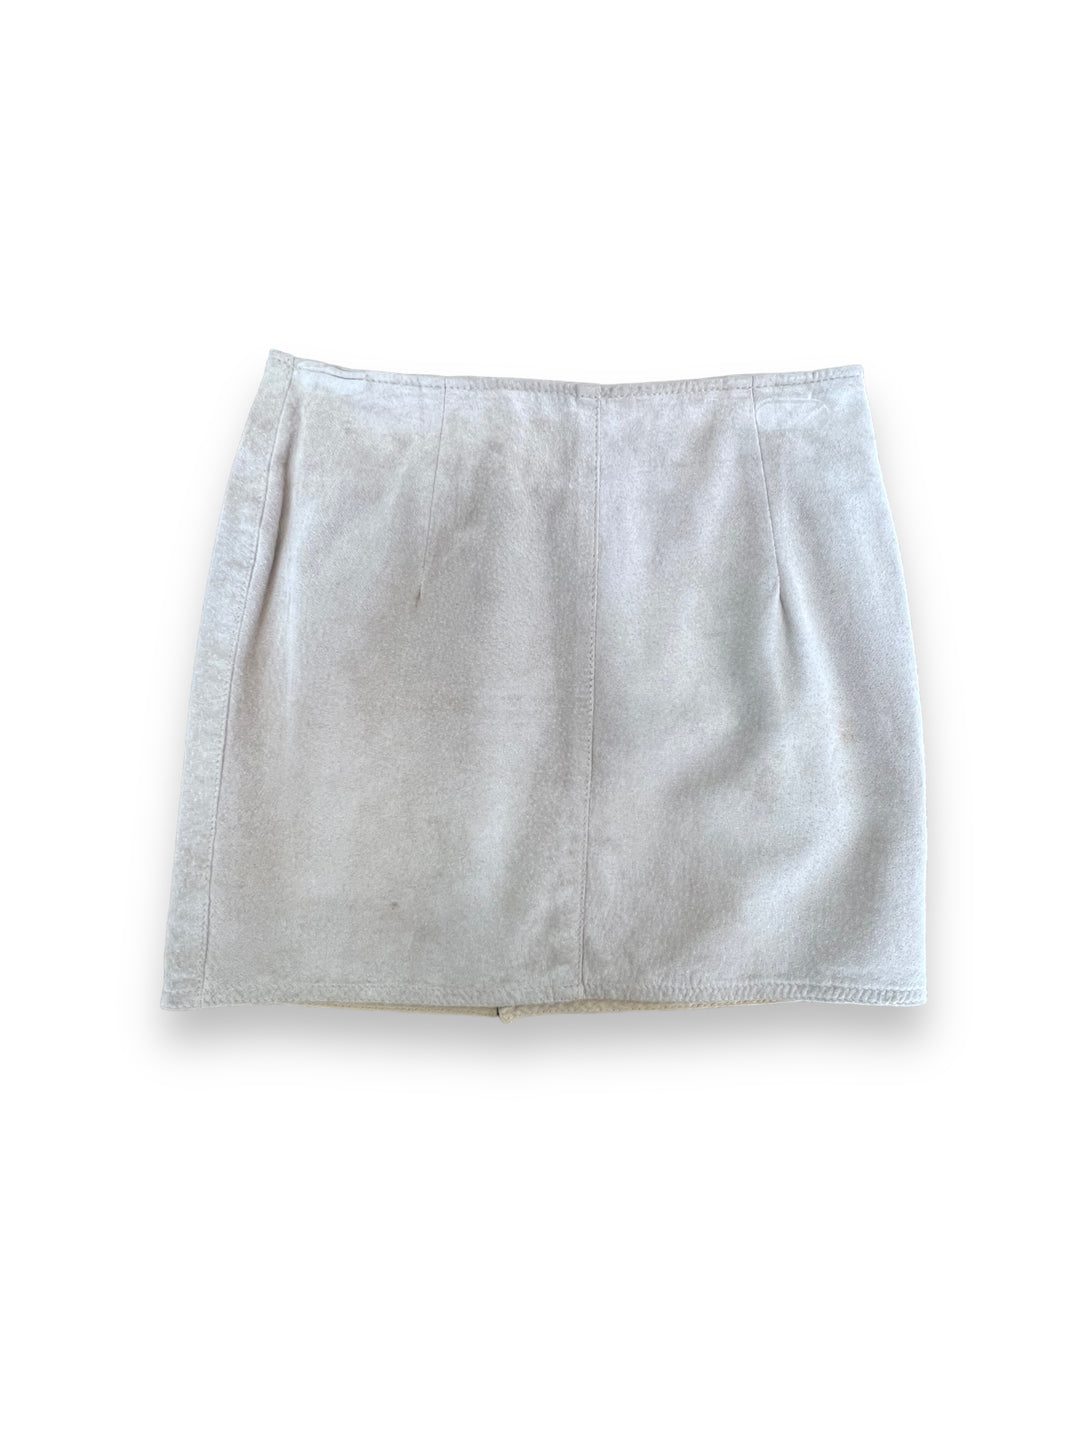 Vintage Mini Suede Leather Skirt Women’s Extra Small(32)